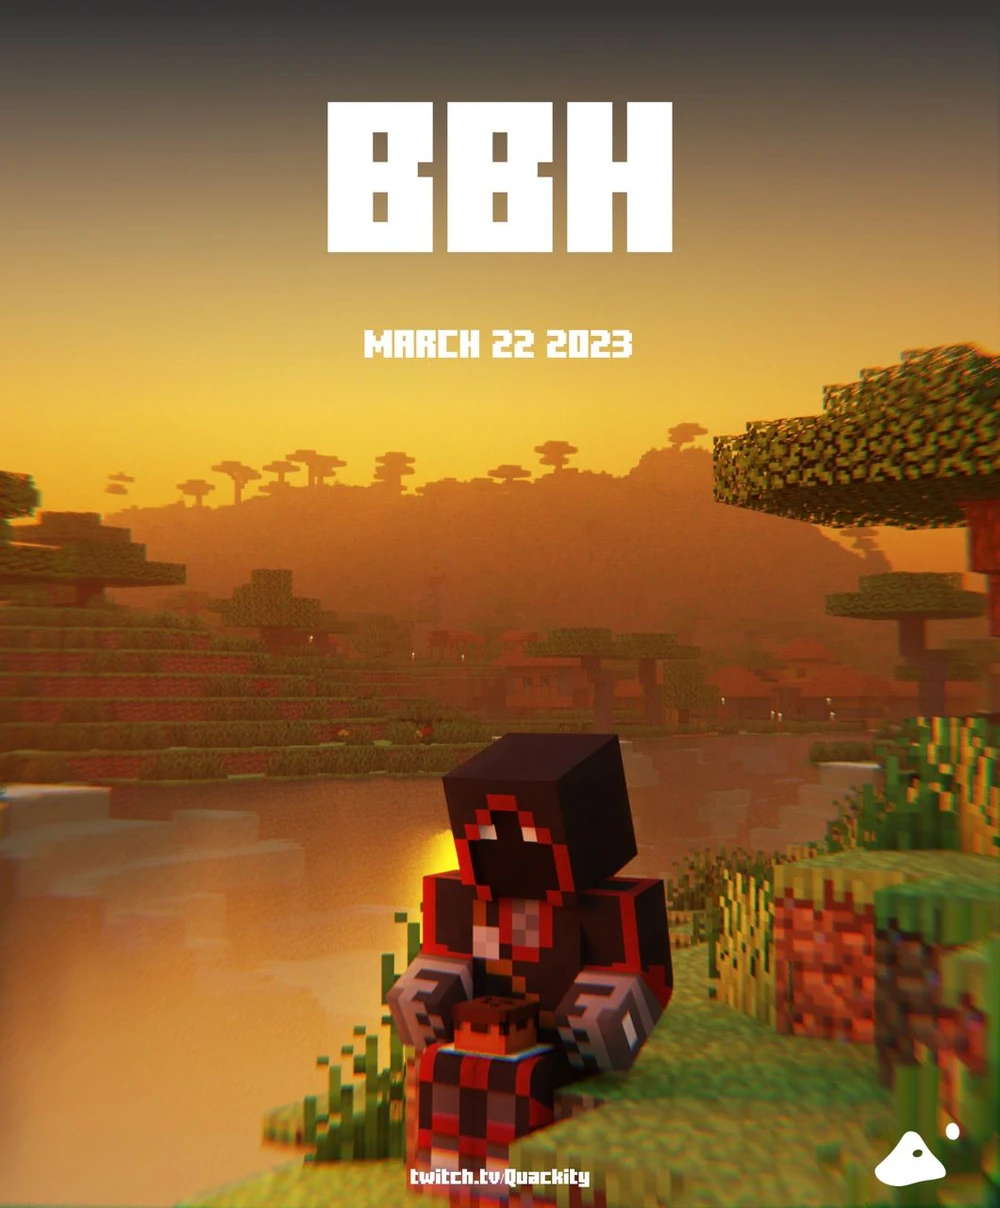 Official announcement poster for Bad. He sits near a river at sunset, legs dangling off the block he's sitting on. On his lap is a plate with a small pastry, maybe a muffin. He looks like he's ready to eat it.